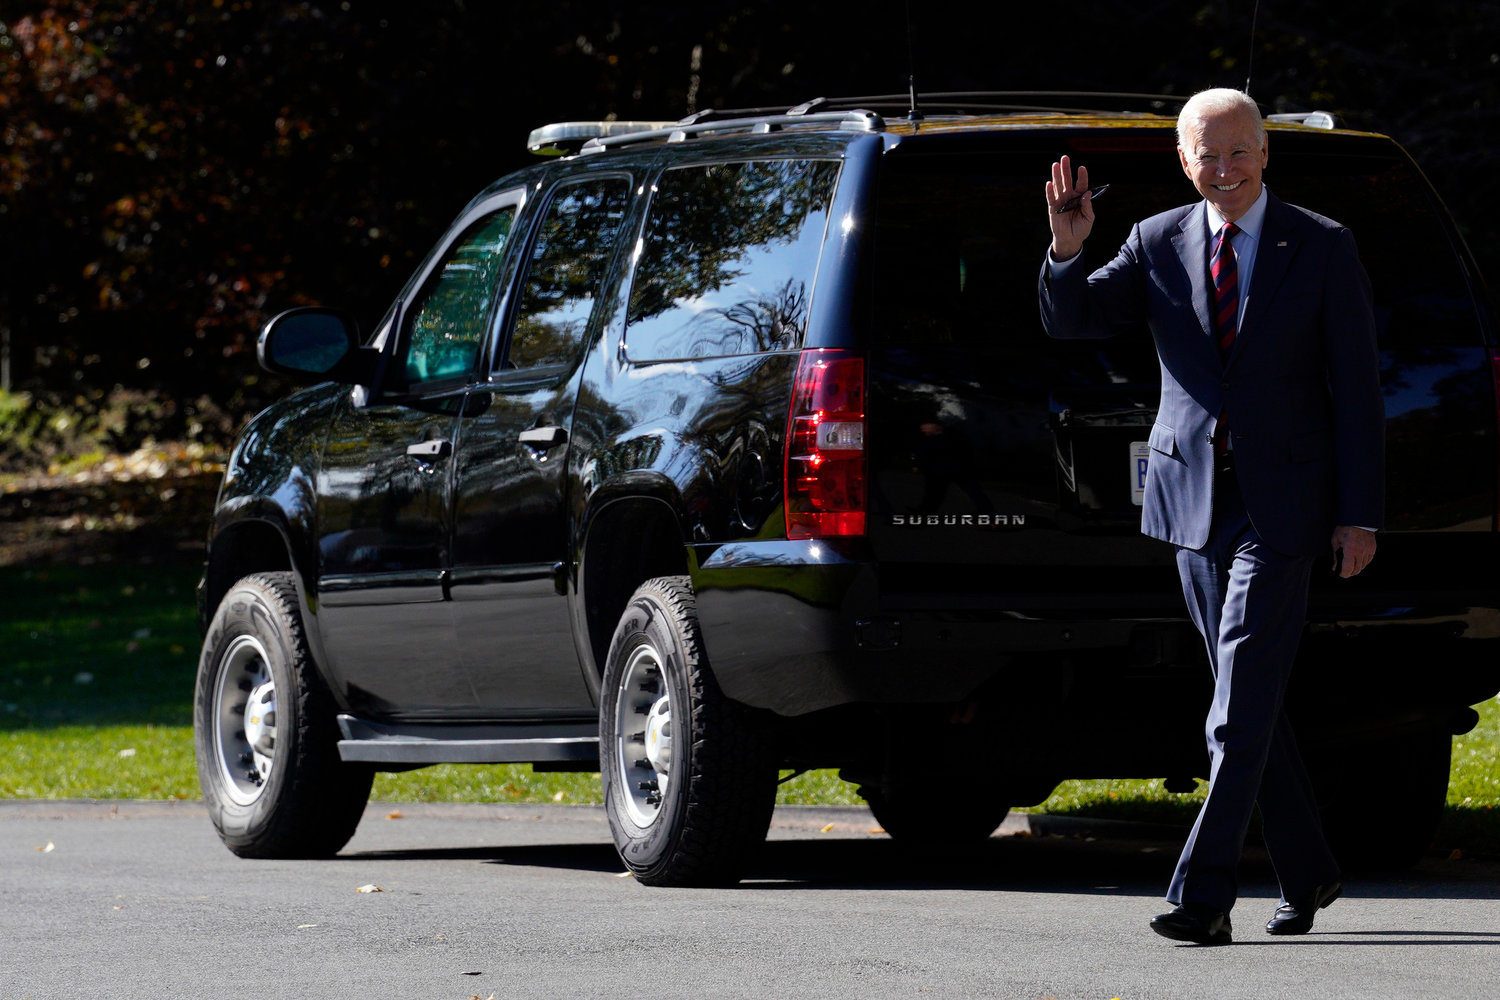 President Joe Biden waves as he walks on the South Lawn of the White House in Washington, D.C., before going to New Hampshire on Tuesday, Nov. 16, 2021. (Yuri Gripas/Abaca Press/TNS)